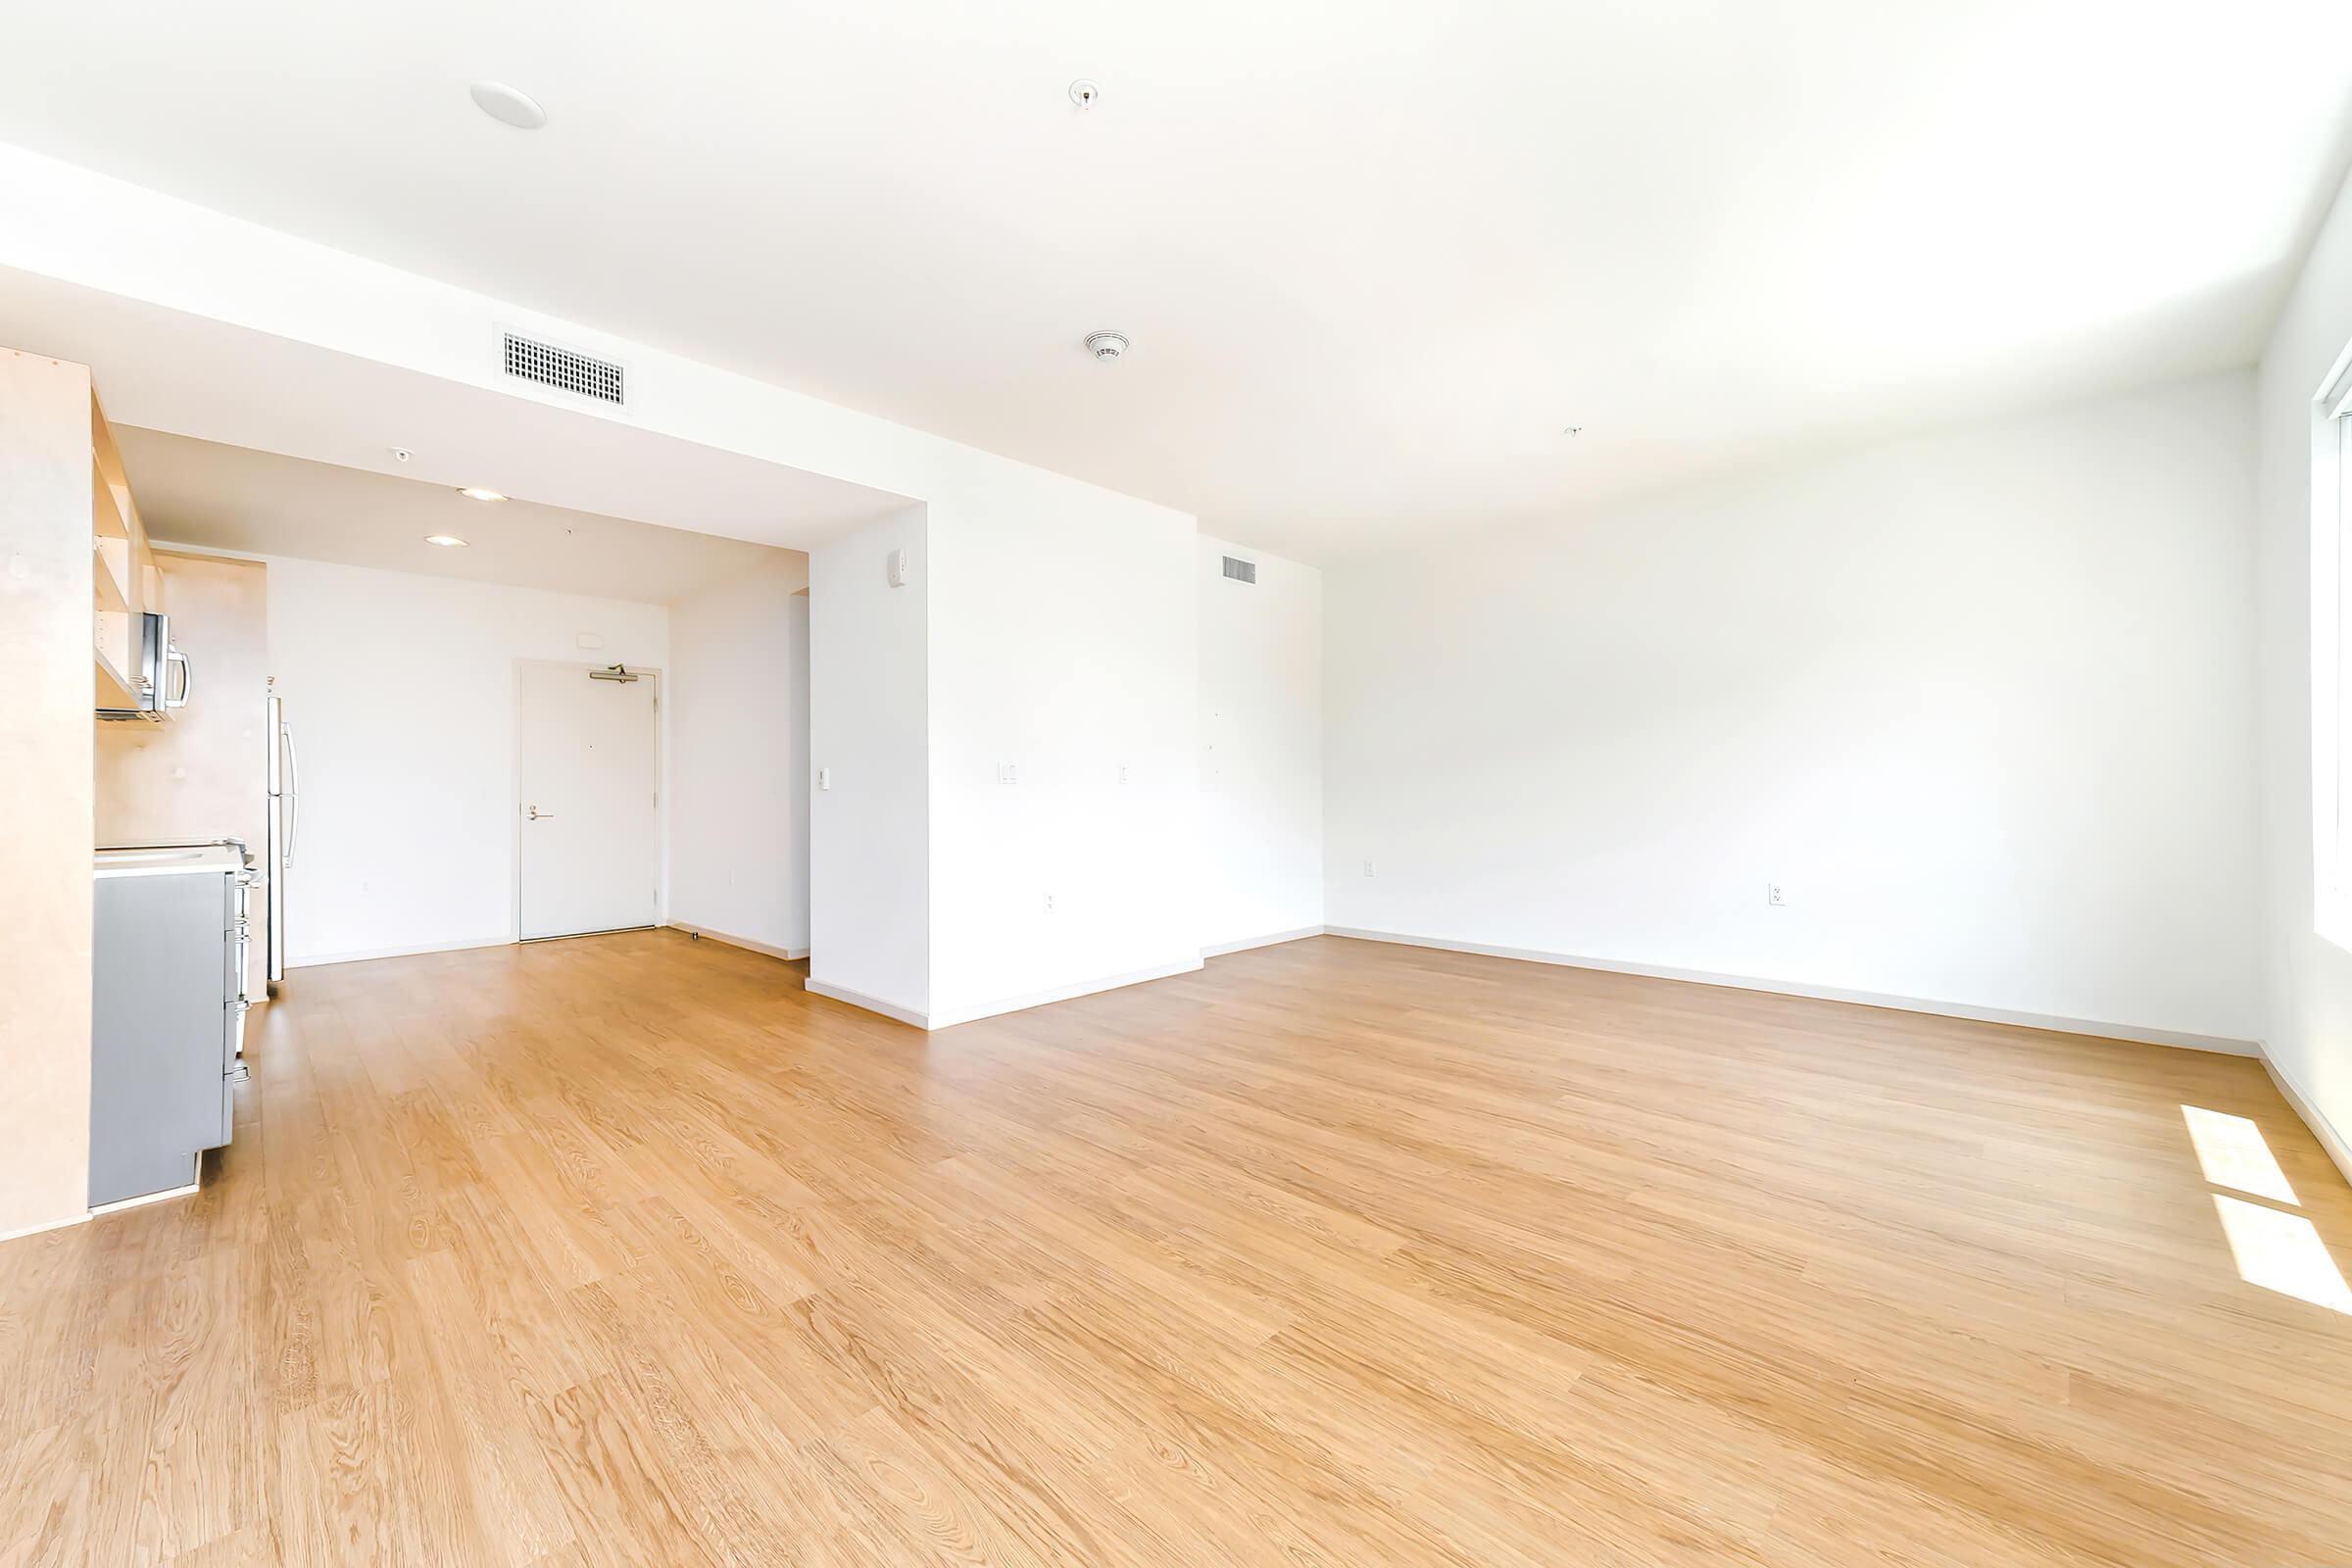 unfurnished apartment with wooden floors